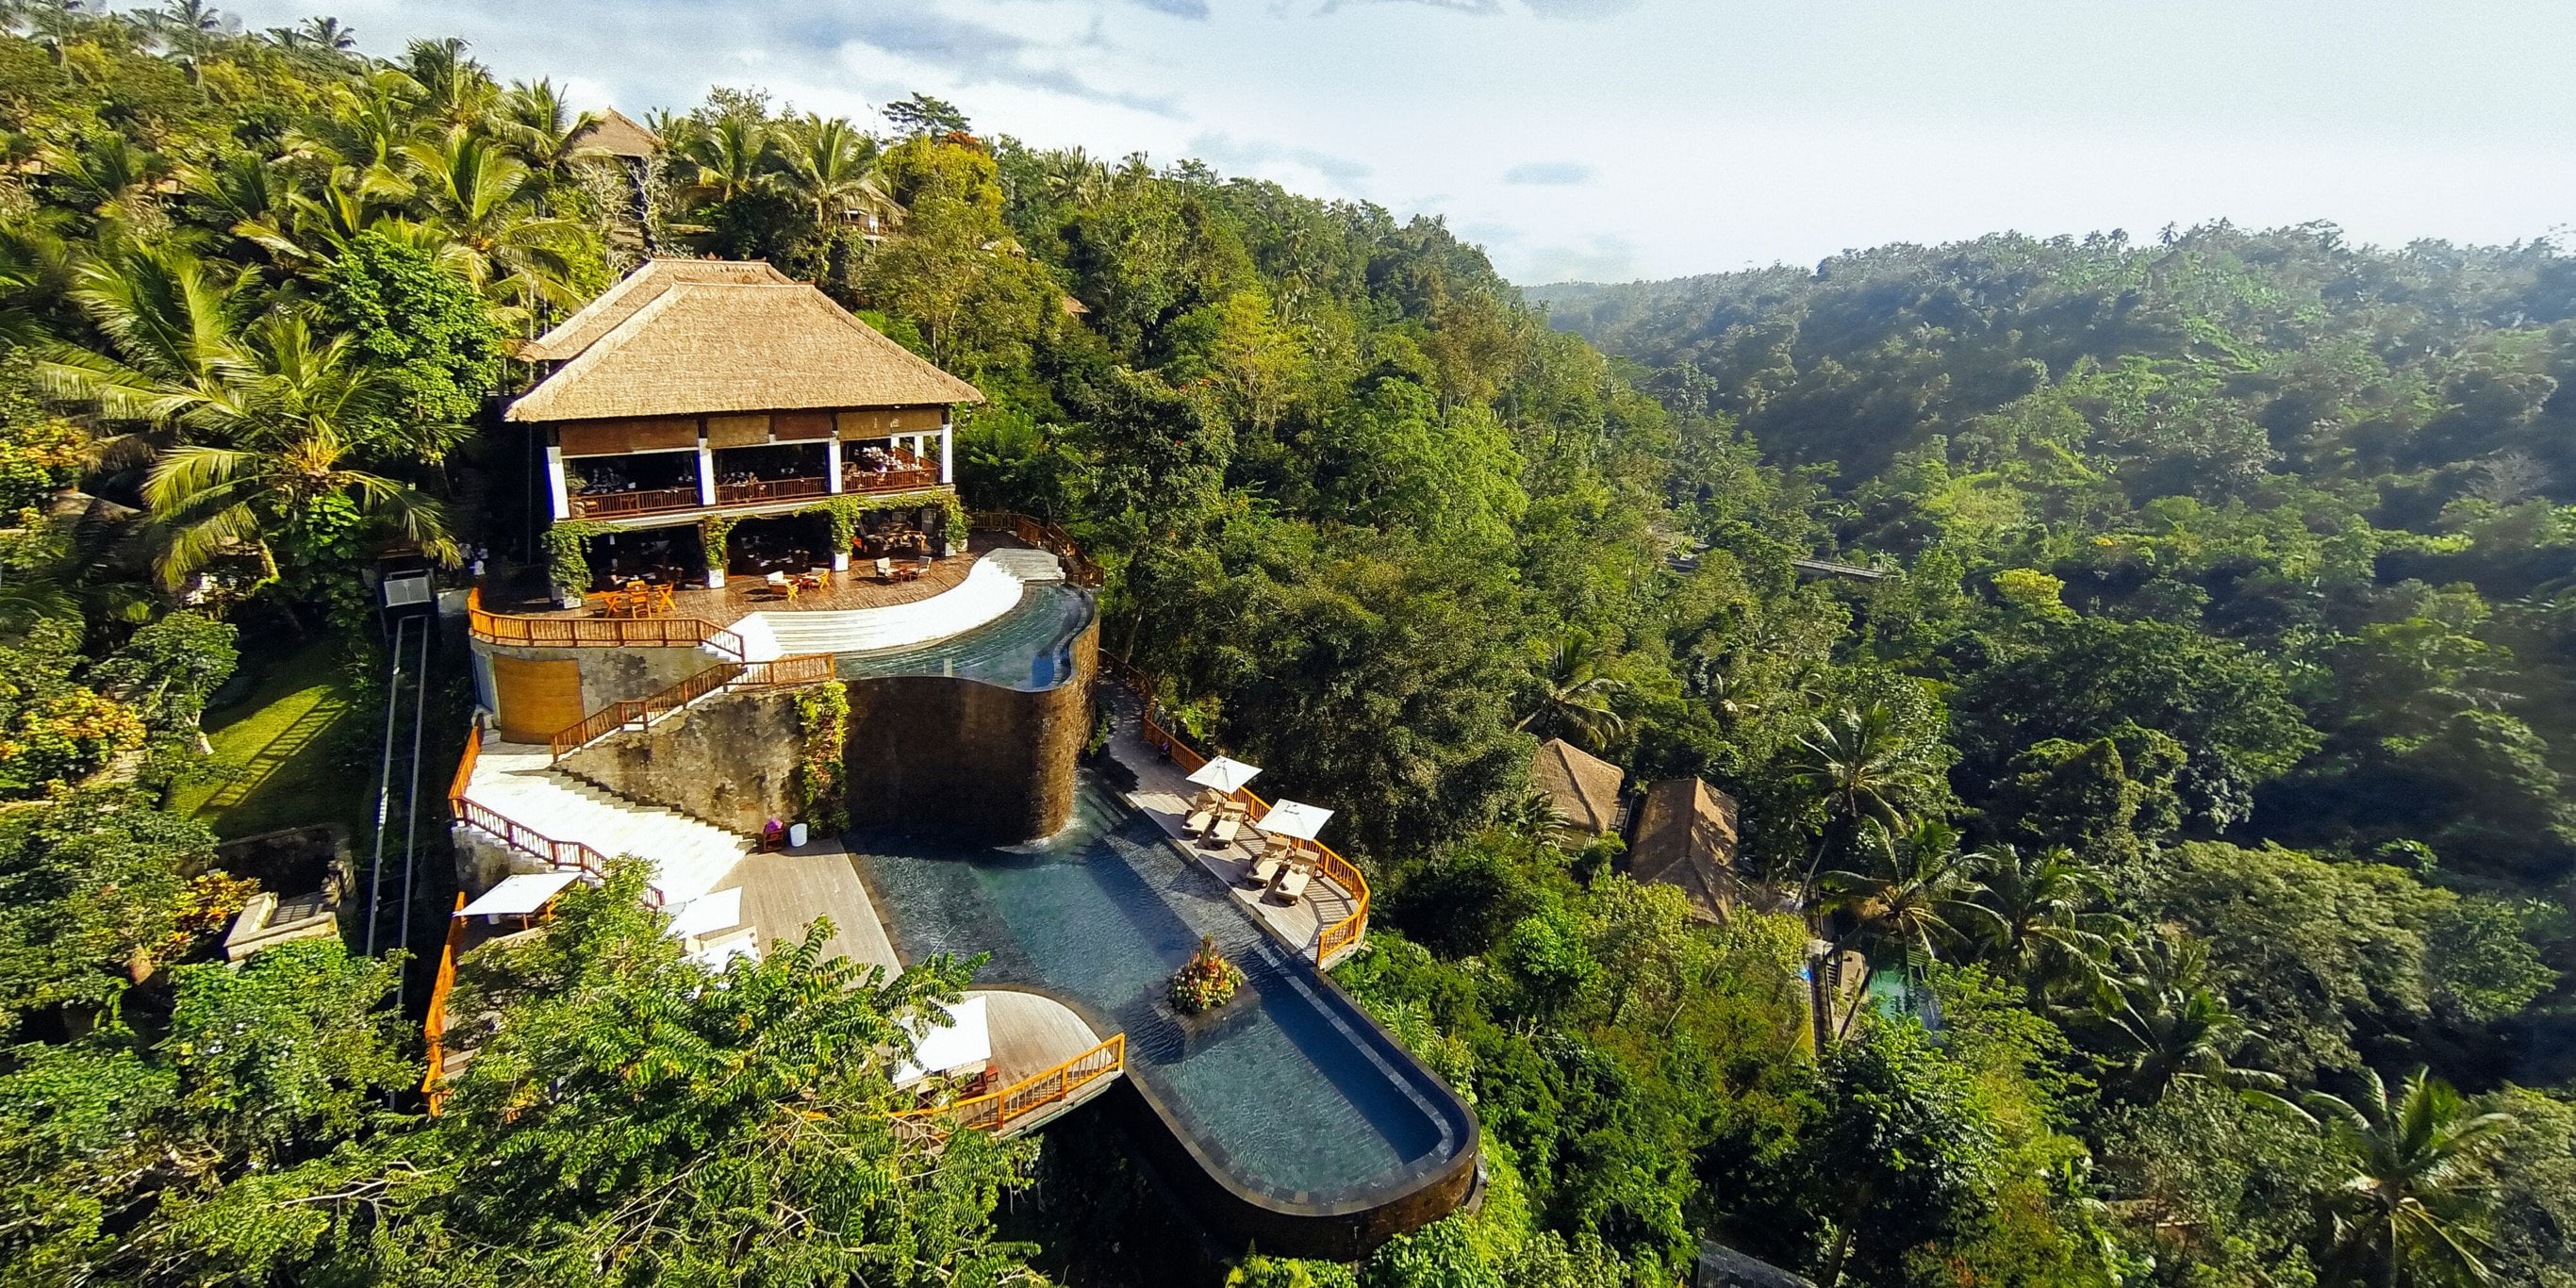 a-luxury-resort-in-the-middle-of-the-jungle-in-bali-has-the-worlds-most-stunning-views-and-the-view-from-the-twin-tiered-pool-quickly-proves-it-business-insider A luxury resort in the middle of the jungle in Bali has the world’s 'most stunning views' — and the view from the twin-tiered pool quickly proves it - Business Insider